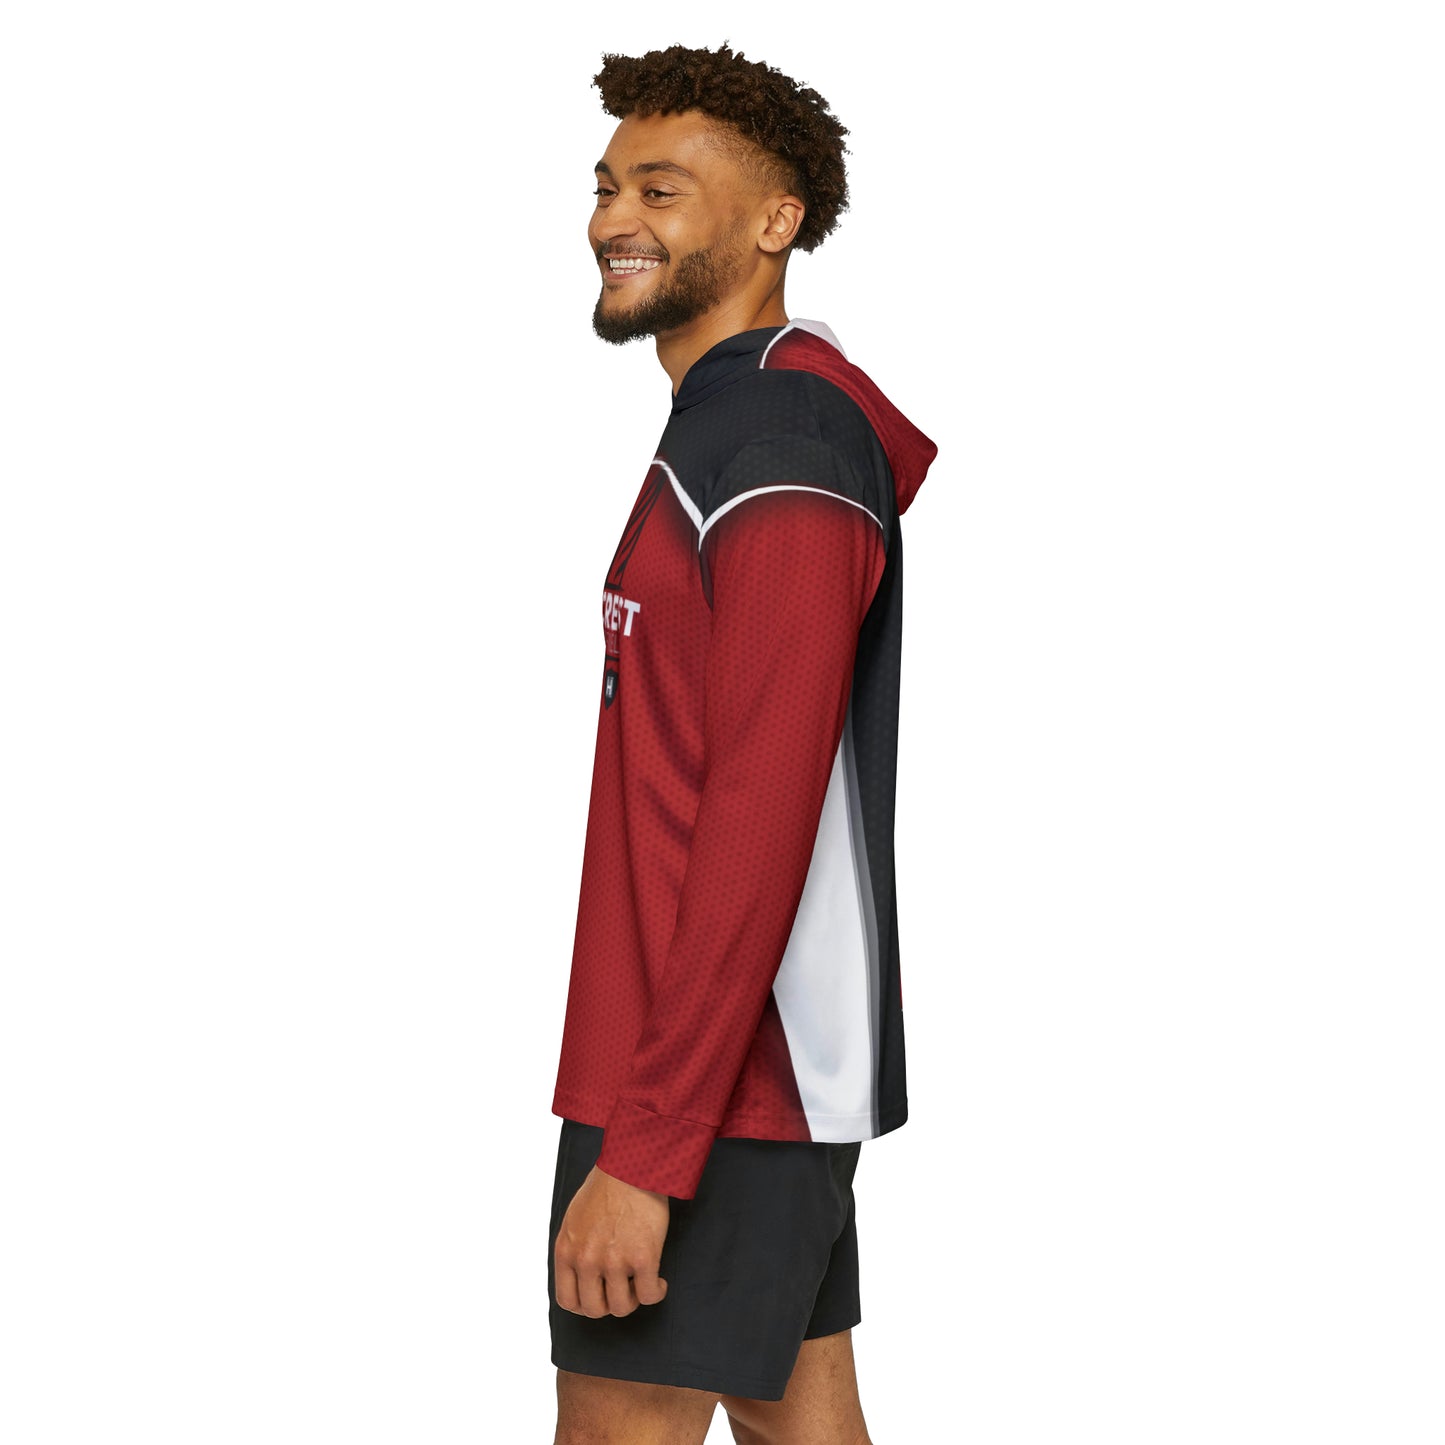 Comets Track & Field - Men's Sports Warmup Hoodie (Matches Uniforms)